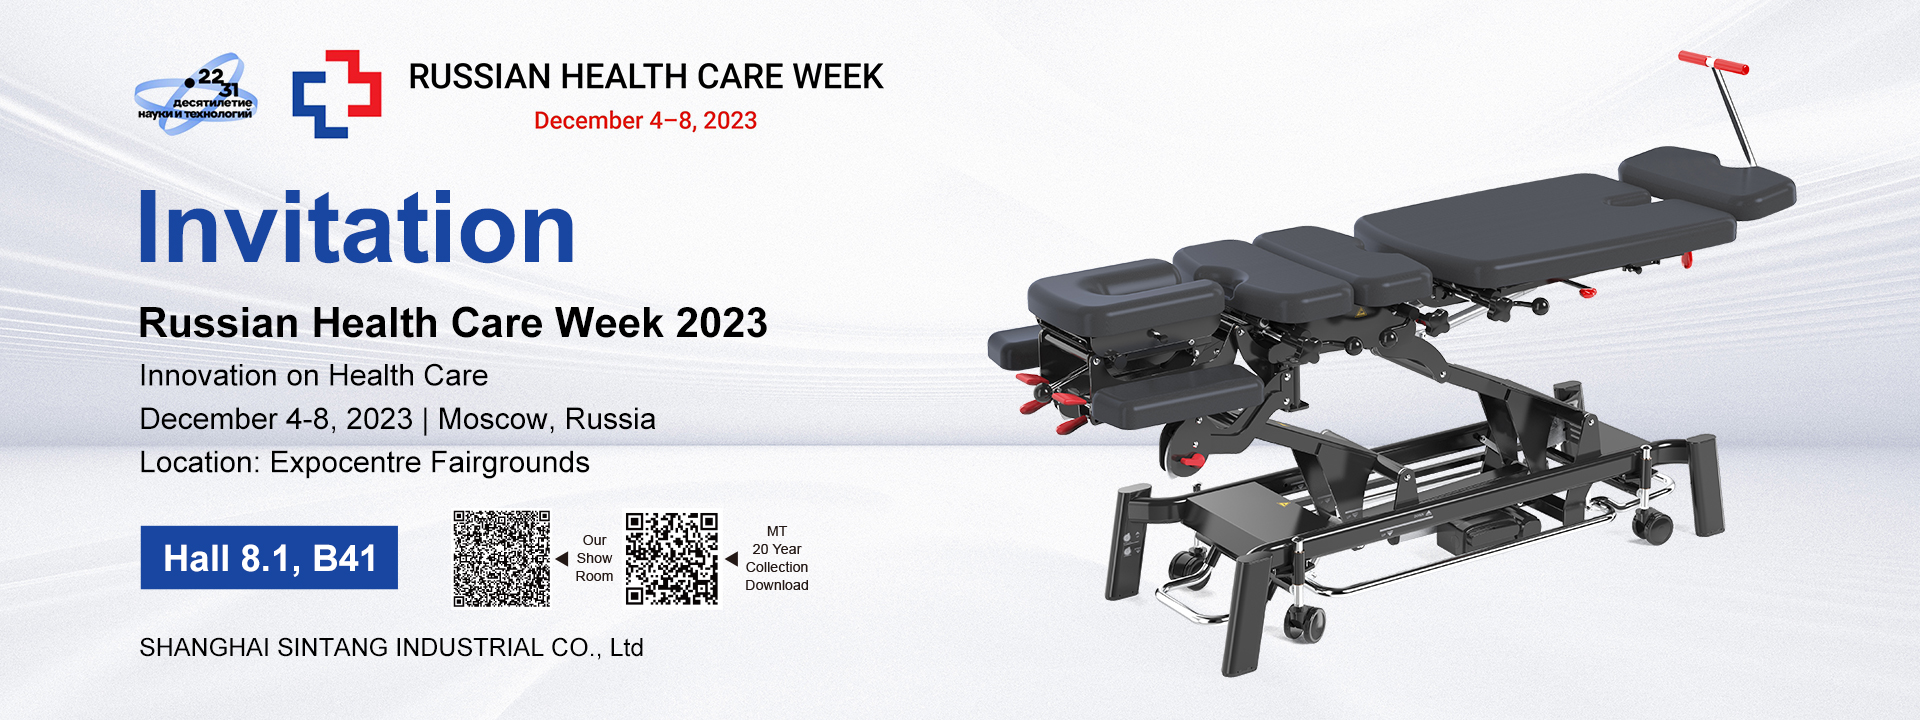 Invitation of Russian Health Care Week,December 4-8th,2023